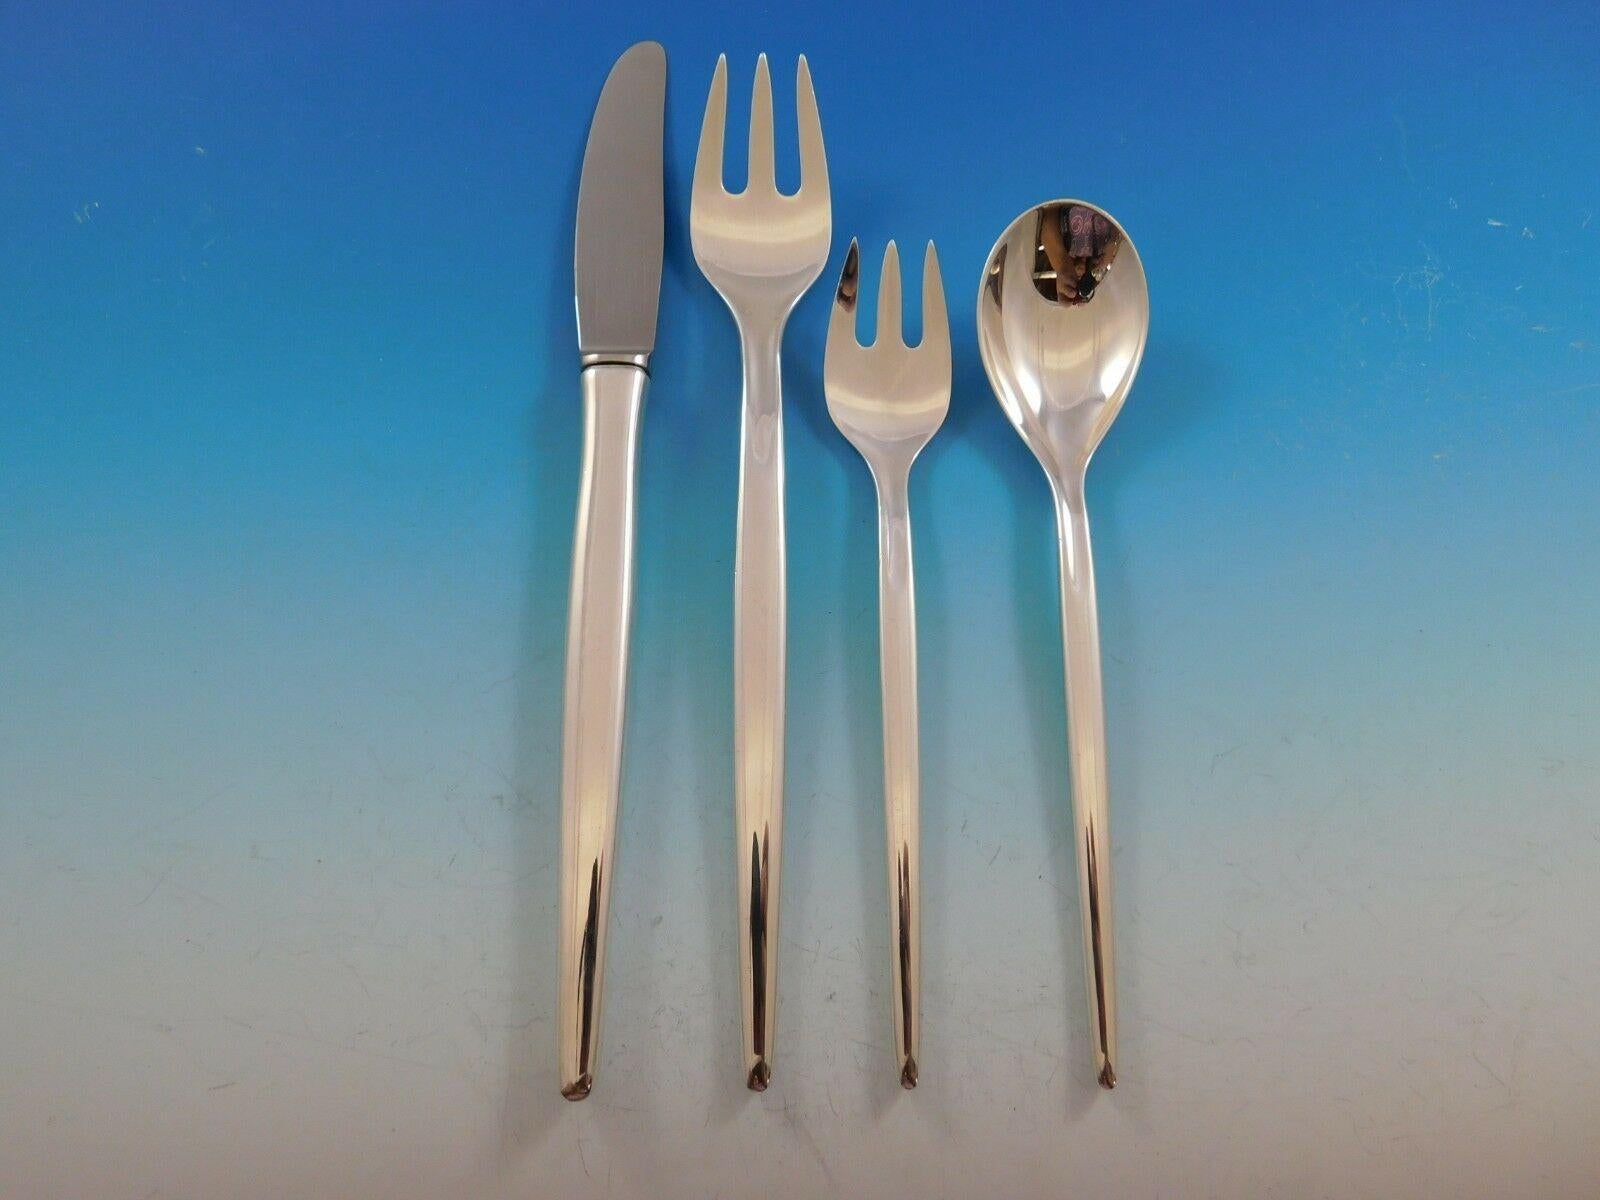 Mid-Century Modern Tulip By Michelsen sterling silver flatware set with unadorned modern elongated handles, 88 pieces. This set includes:

12 dinner size knives, 8 3/8